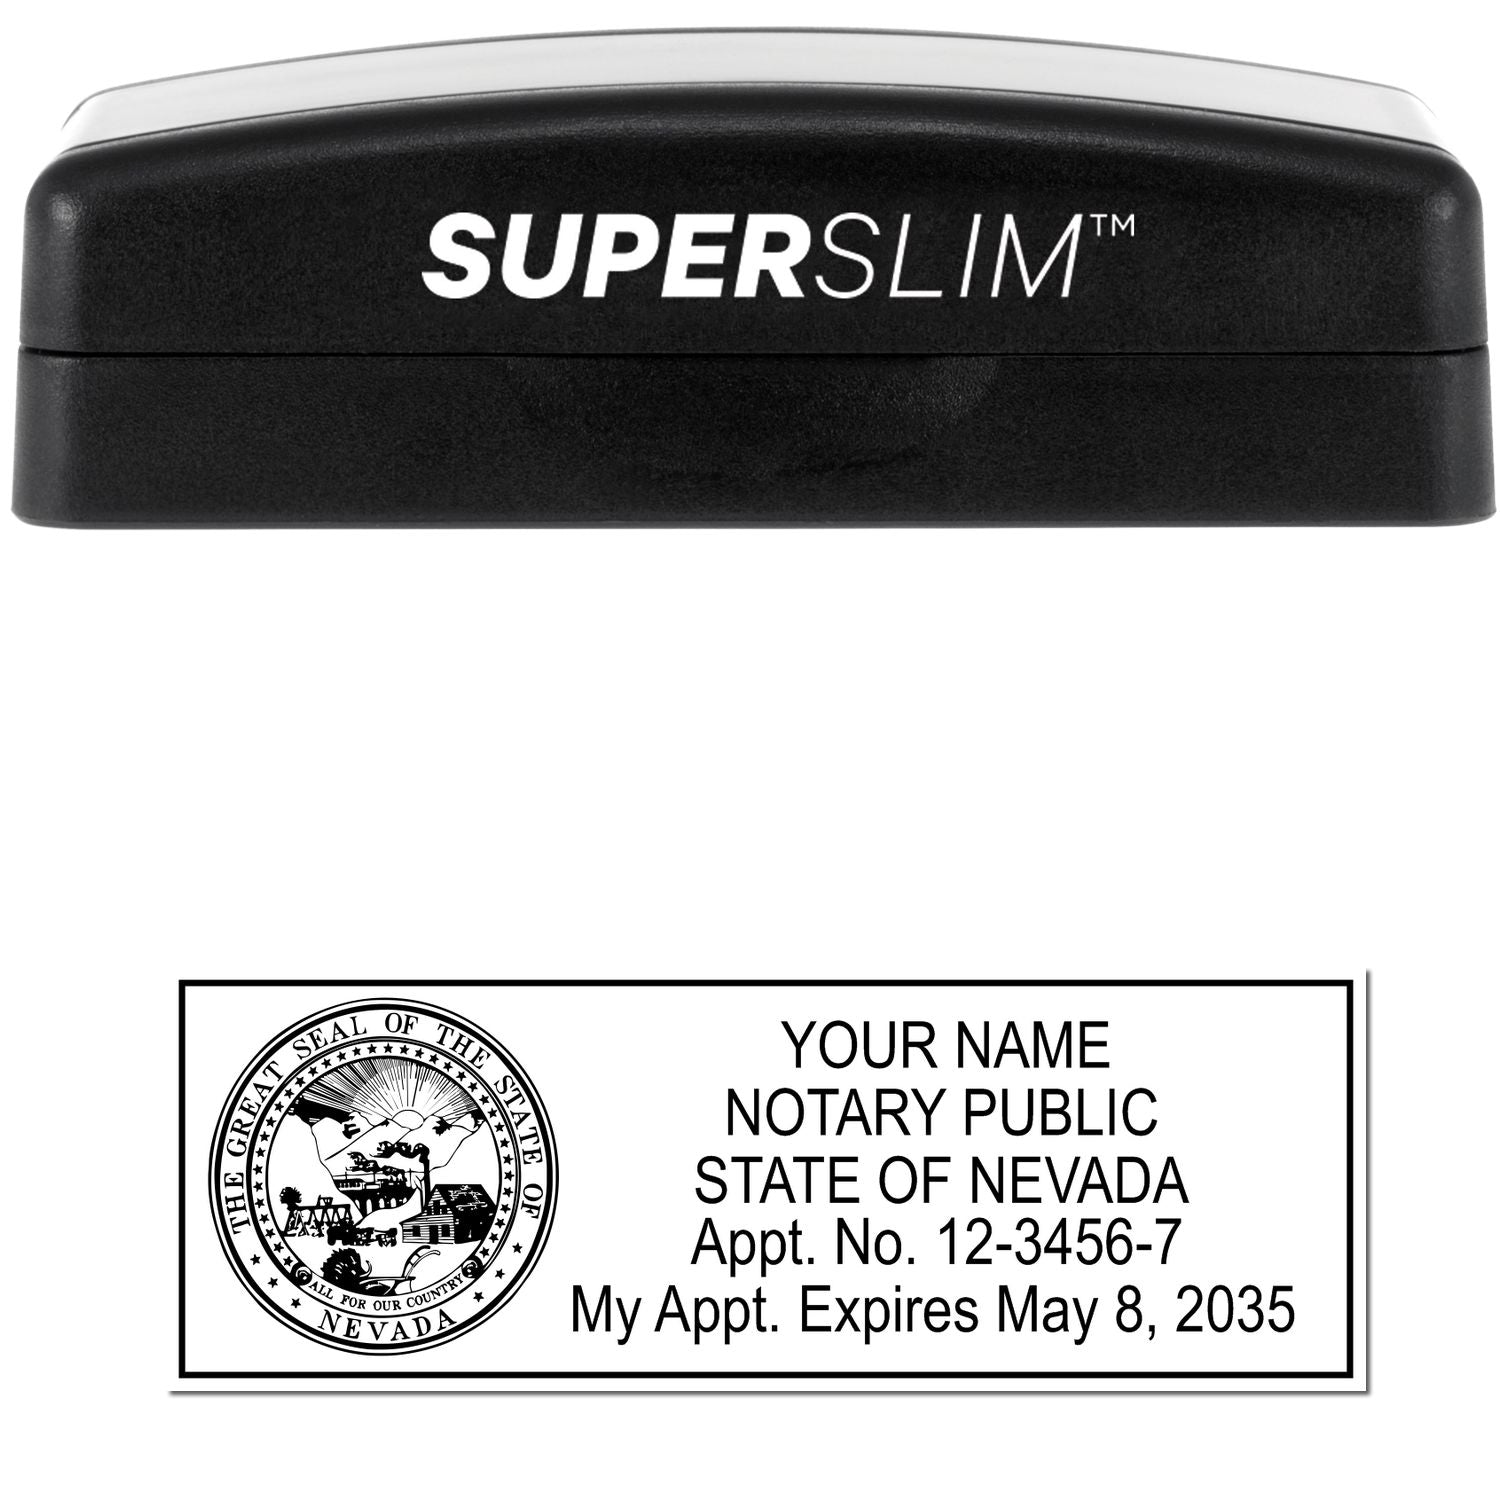 The main image for the Super Slim Nevada Notary Public Stamp depicting a sample of the imprint and electronic files